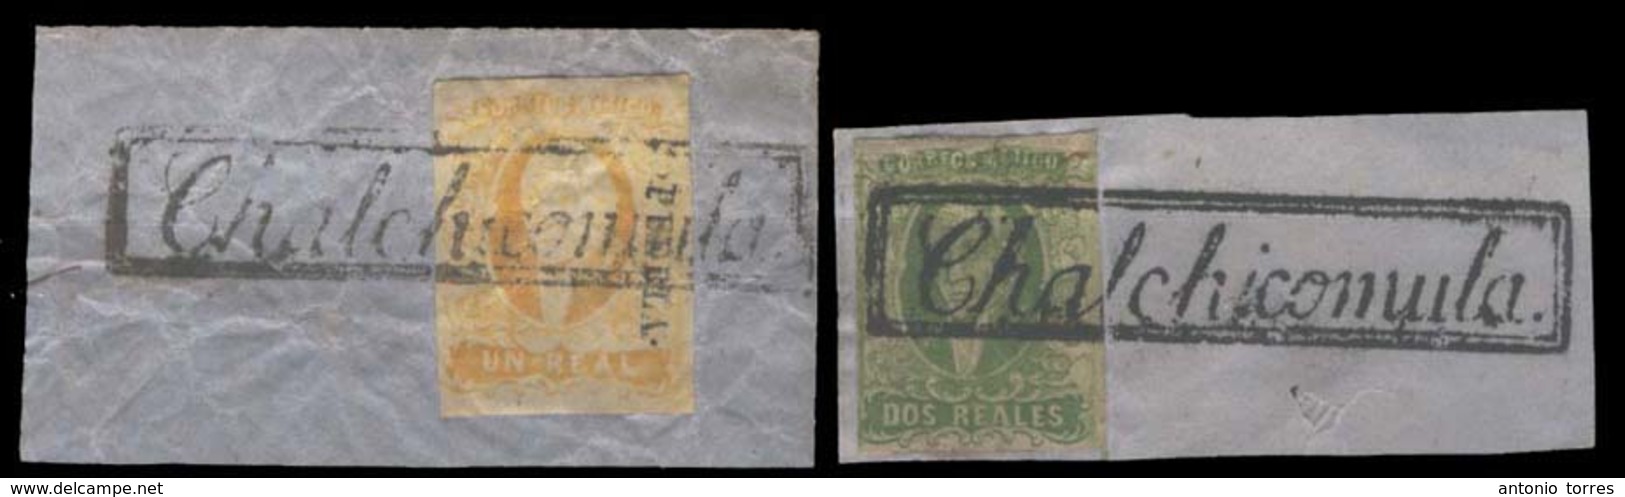 MEXICO. 2/3º. 1856. 1rl. And 2rs. Puebla District (2 Reales With No Name) Both Complete Box CHAL CHICOMULA (xxx). Lovely - Mexique